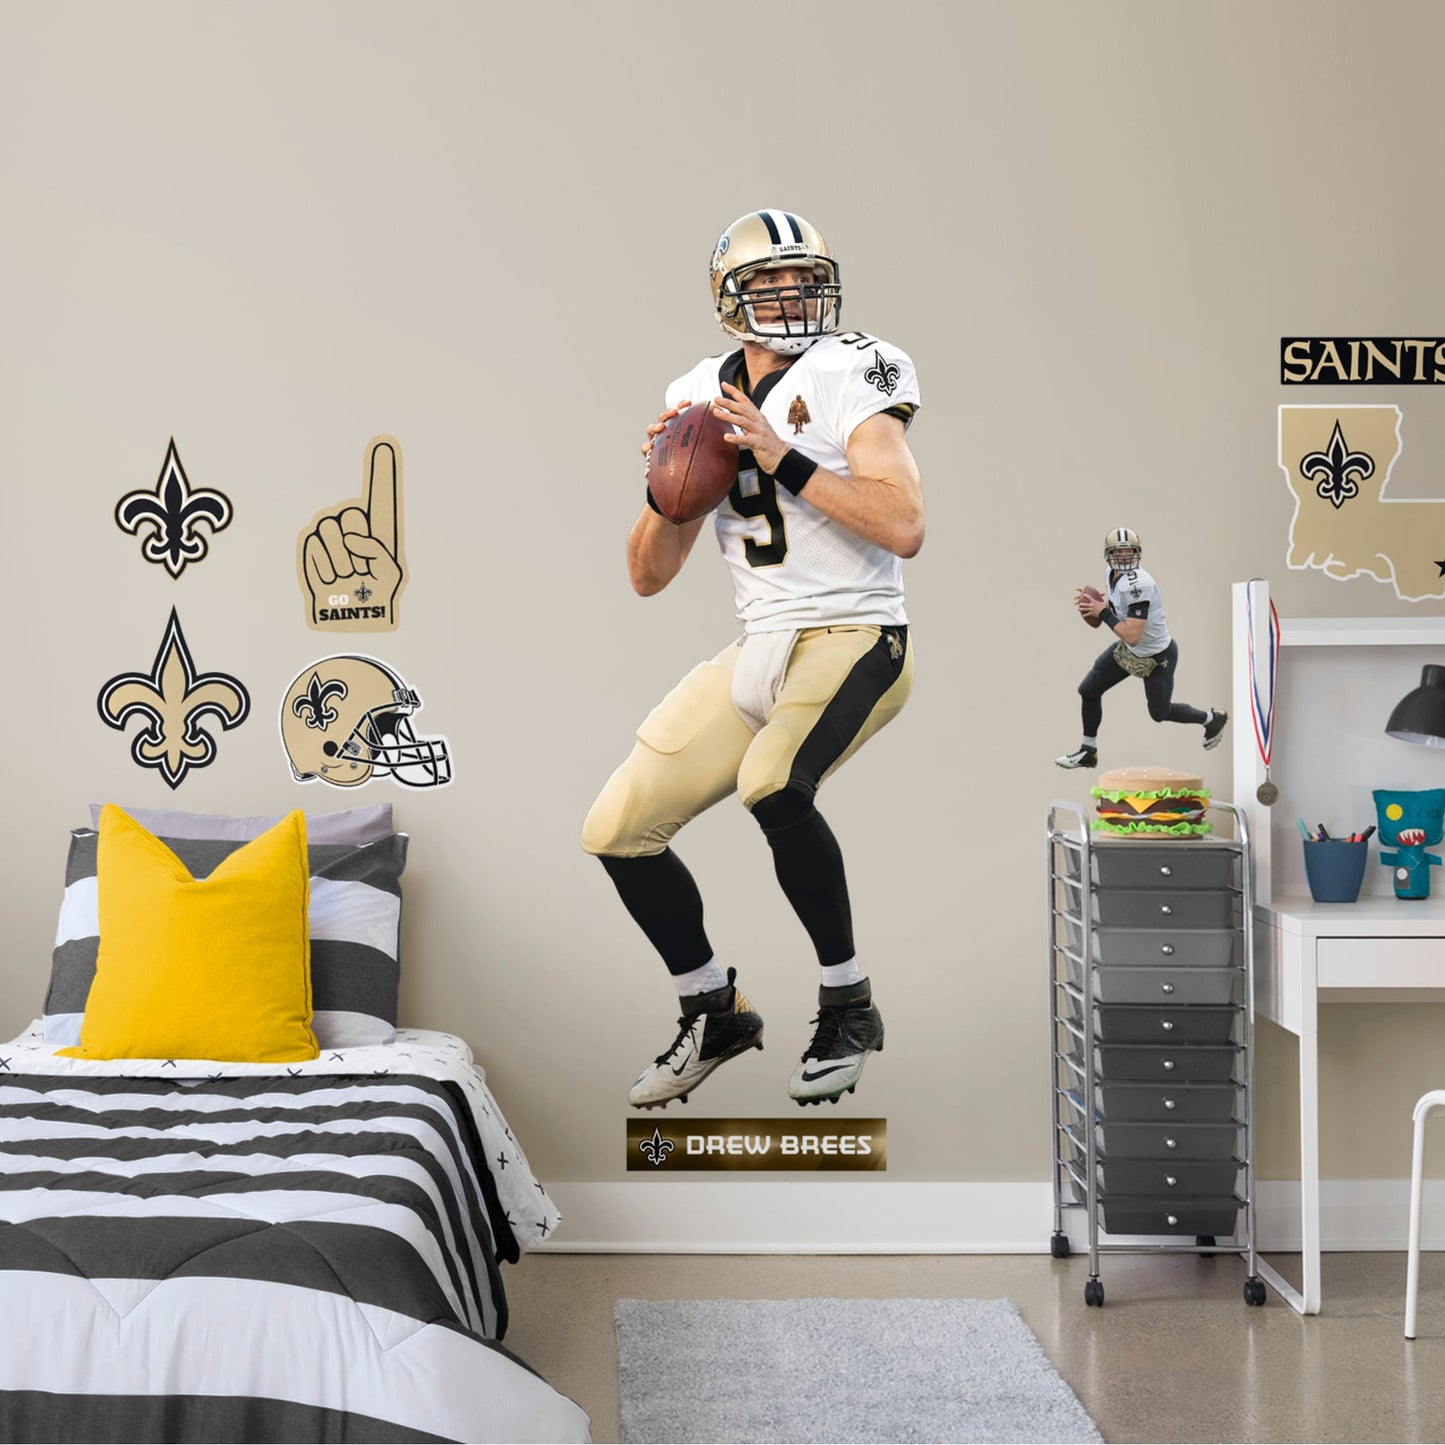 Life-Size Athlete + 11 Decals (29"W x 76"H) Let your favorite Saints quarterback go marching in your man cave, sports bar, or training space with this durable Drew Brees vinyl wall decal. The MVP of Super Bowl XLIV and one of the greatest quarterbacks of all time, Brees is a player you'll be proud to display in your personal Superdome. Should you call an audible and need to relocate, the high-quality decal is easy to remove and display in a new space.